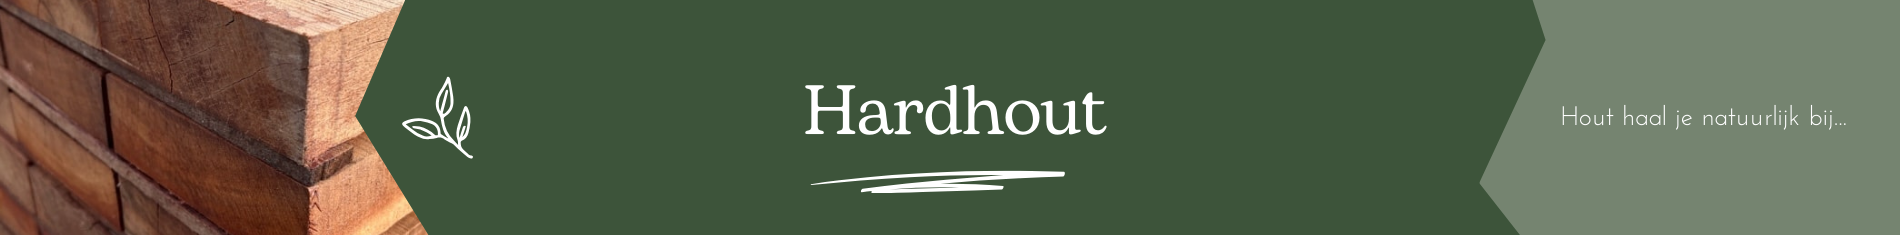 Hardhout